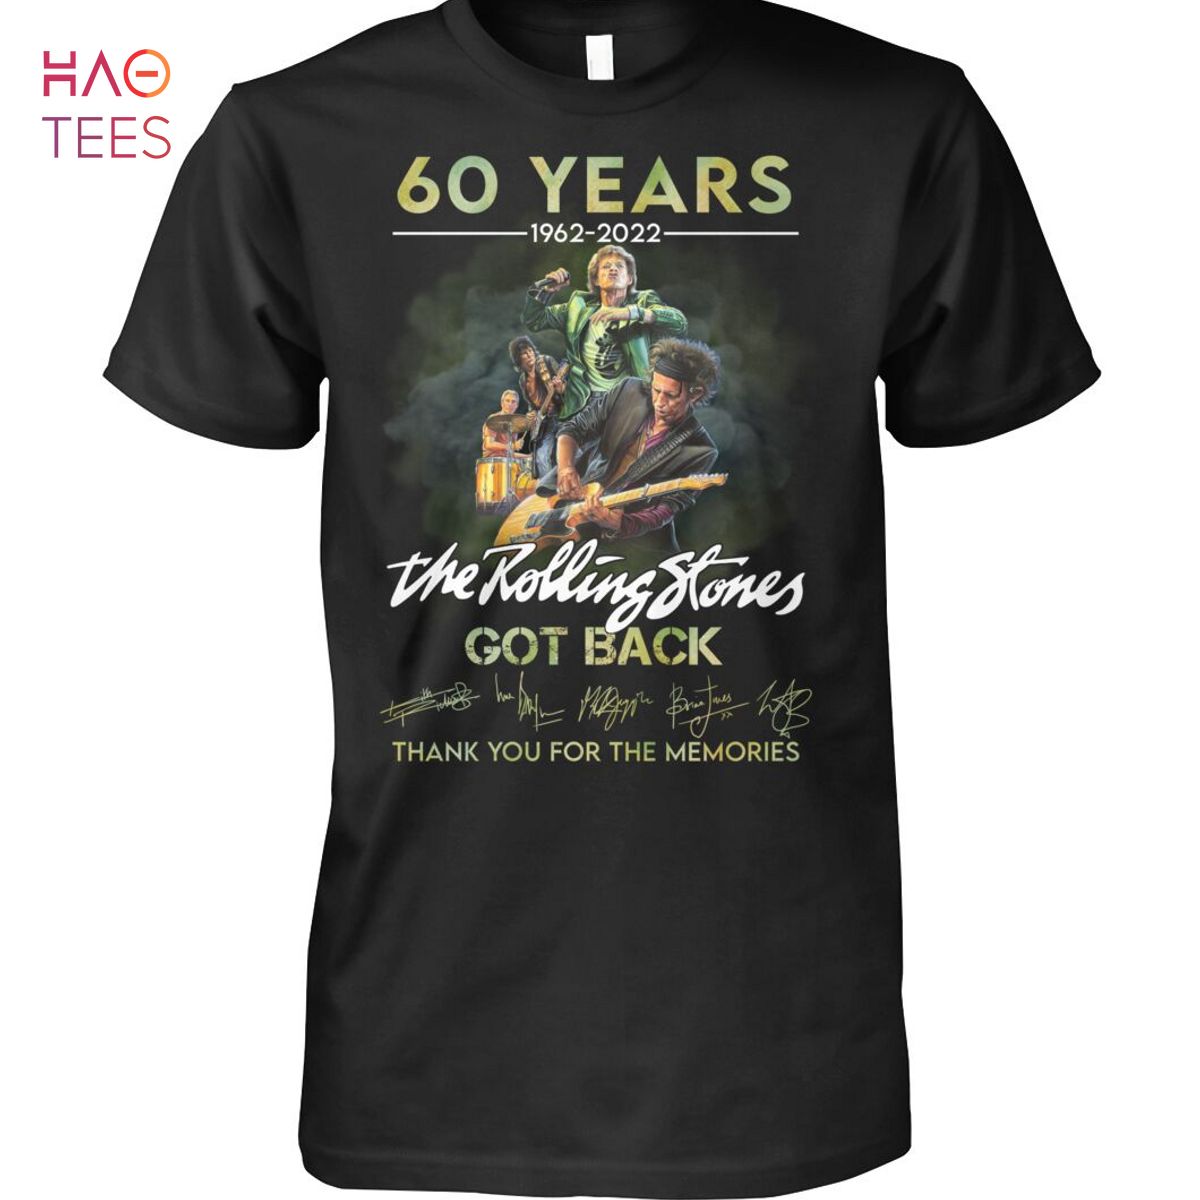 60 Years 1962-2022 The Rolling Stones Shirt